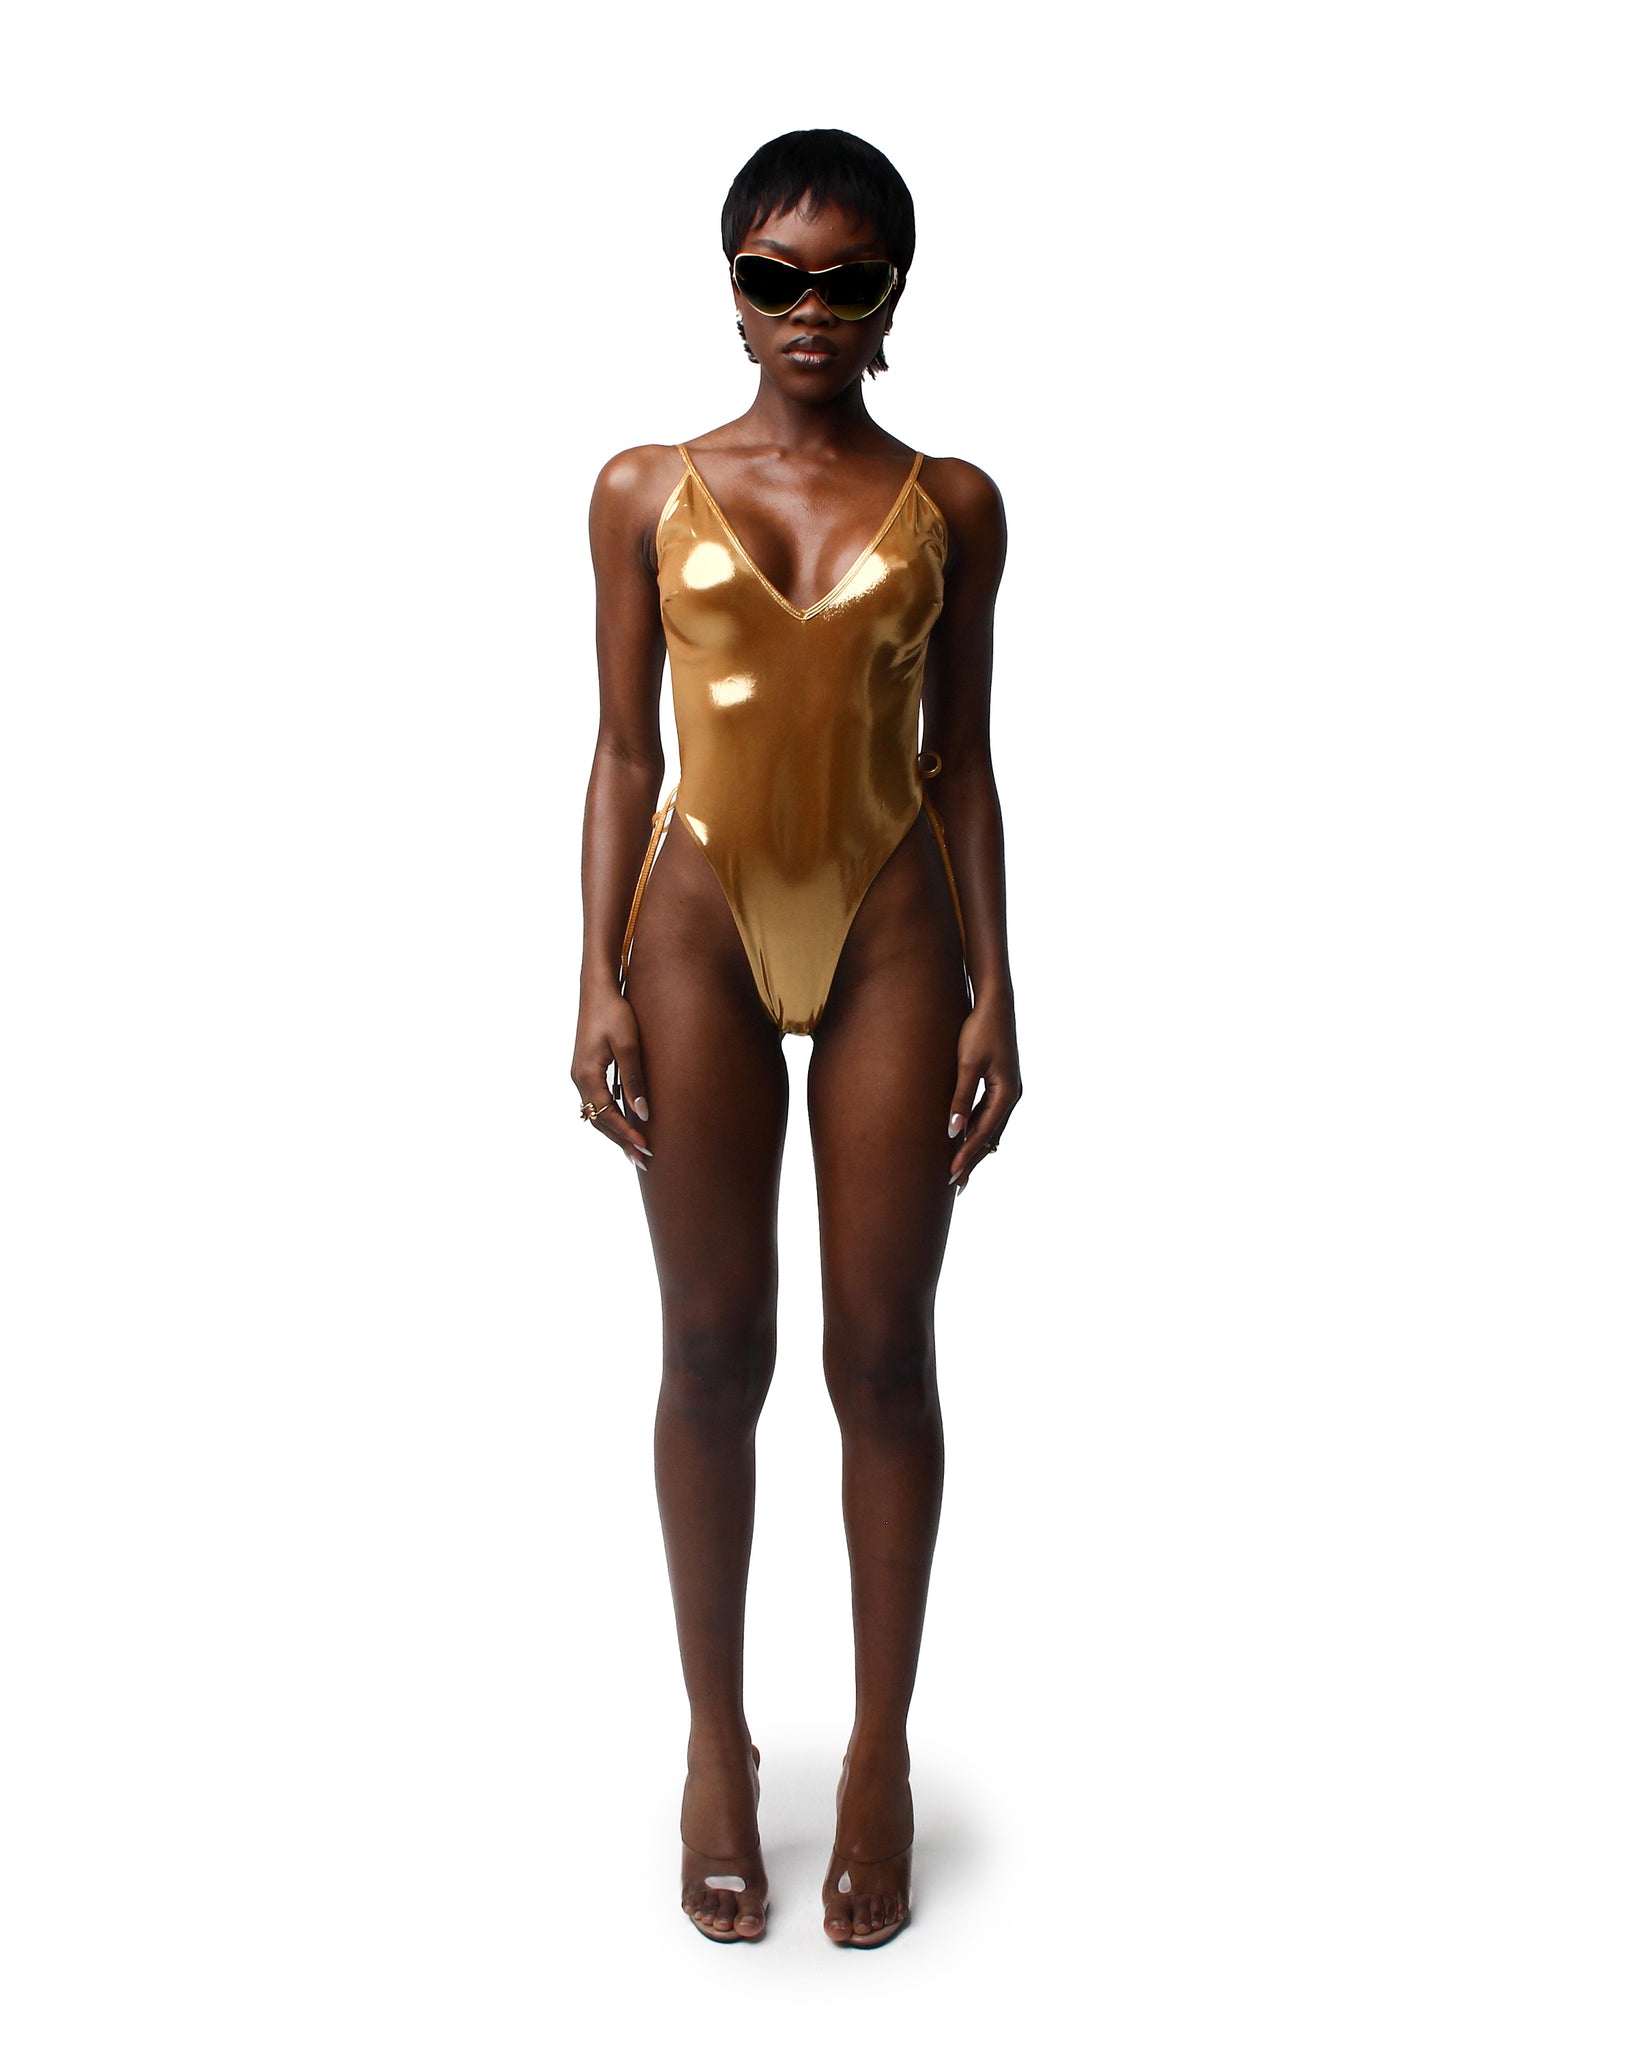 Dive into summer with our selection of women's swimwear, featuring everything from classic bikinis to trendy matching sets. This classic gold one pice looks great on everyone.